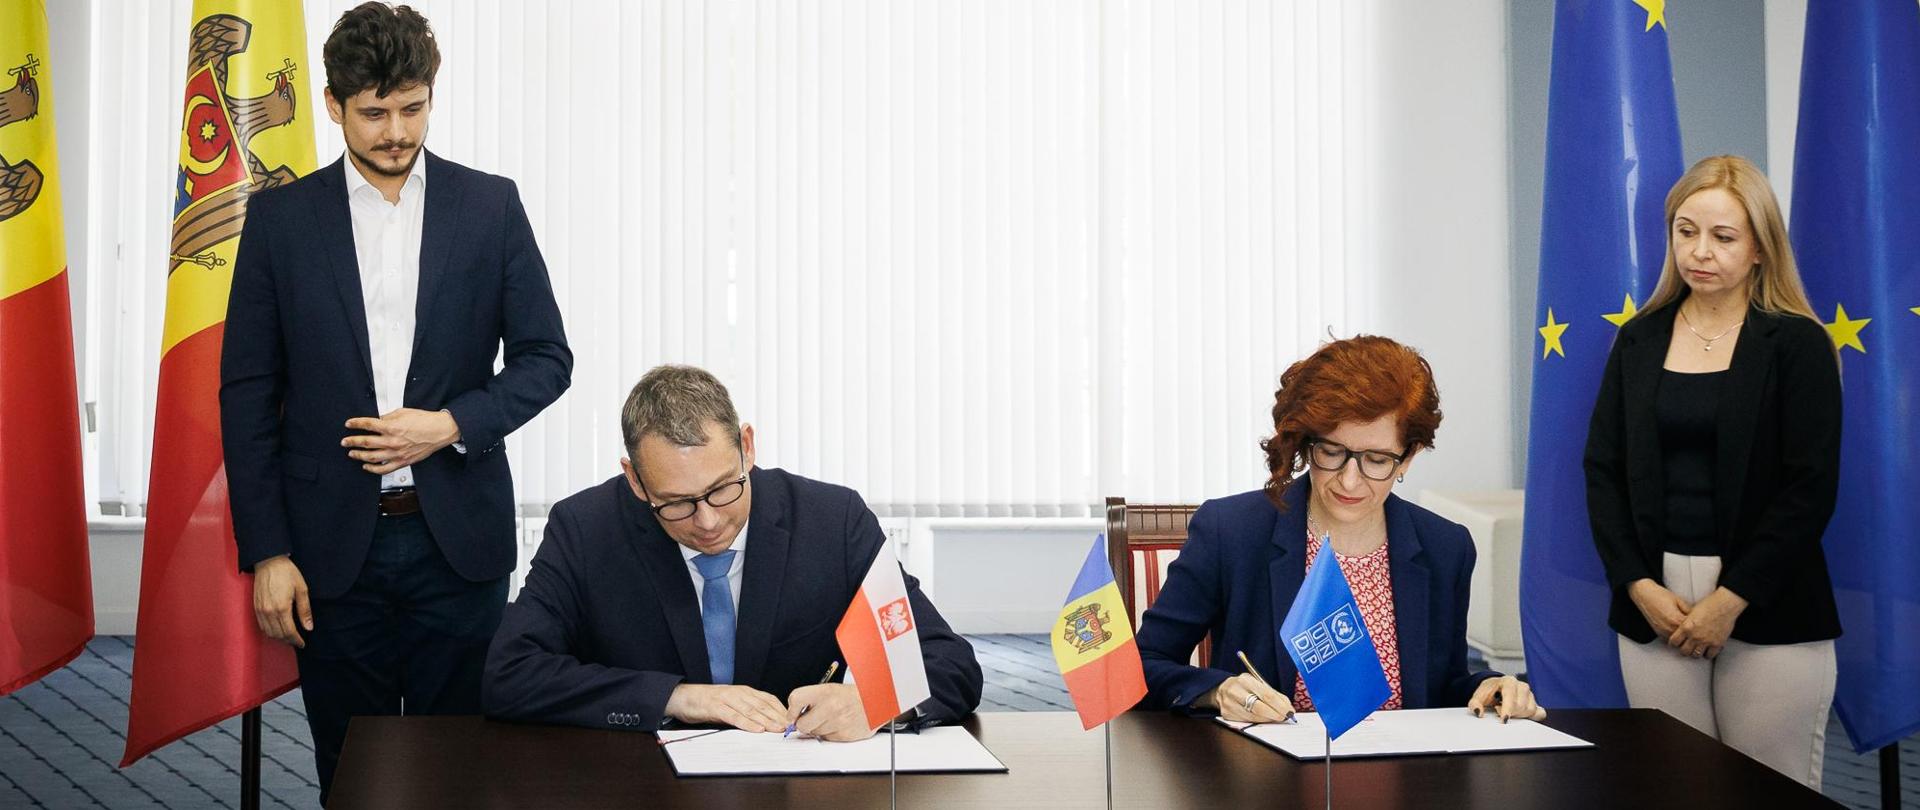 Two individuals signing documents in front of Moldova and EU flags.